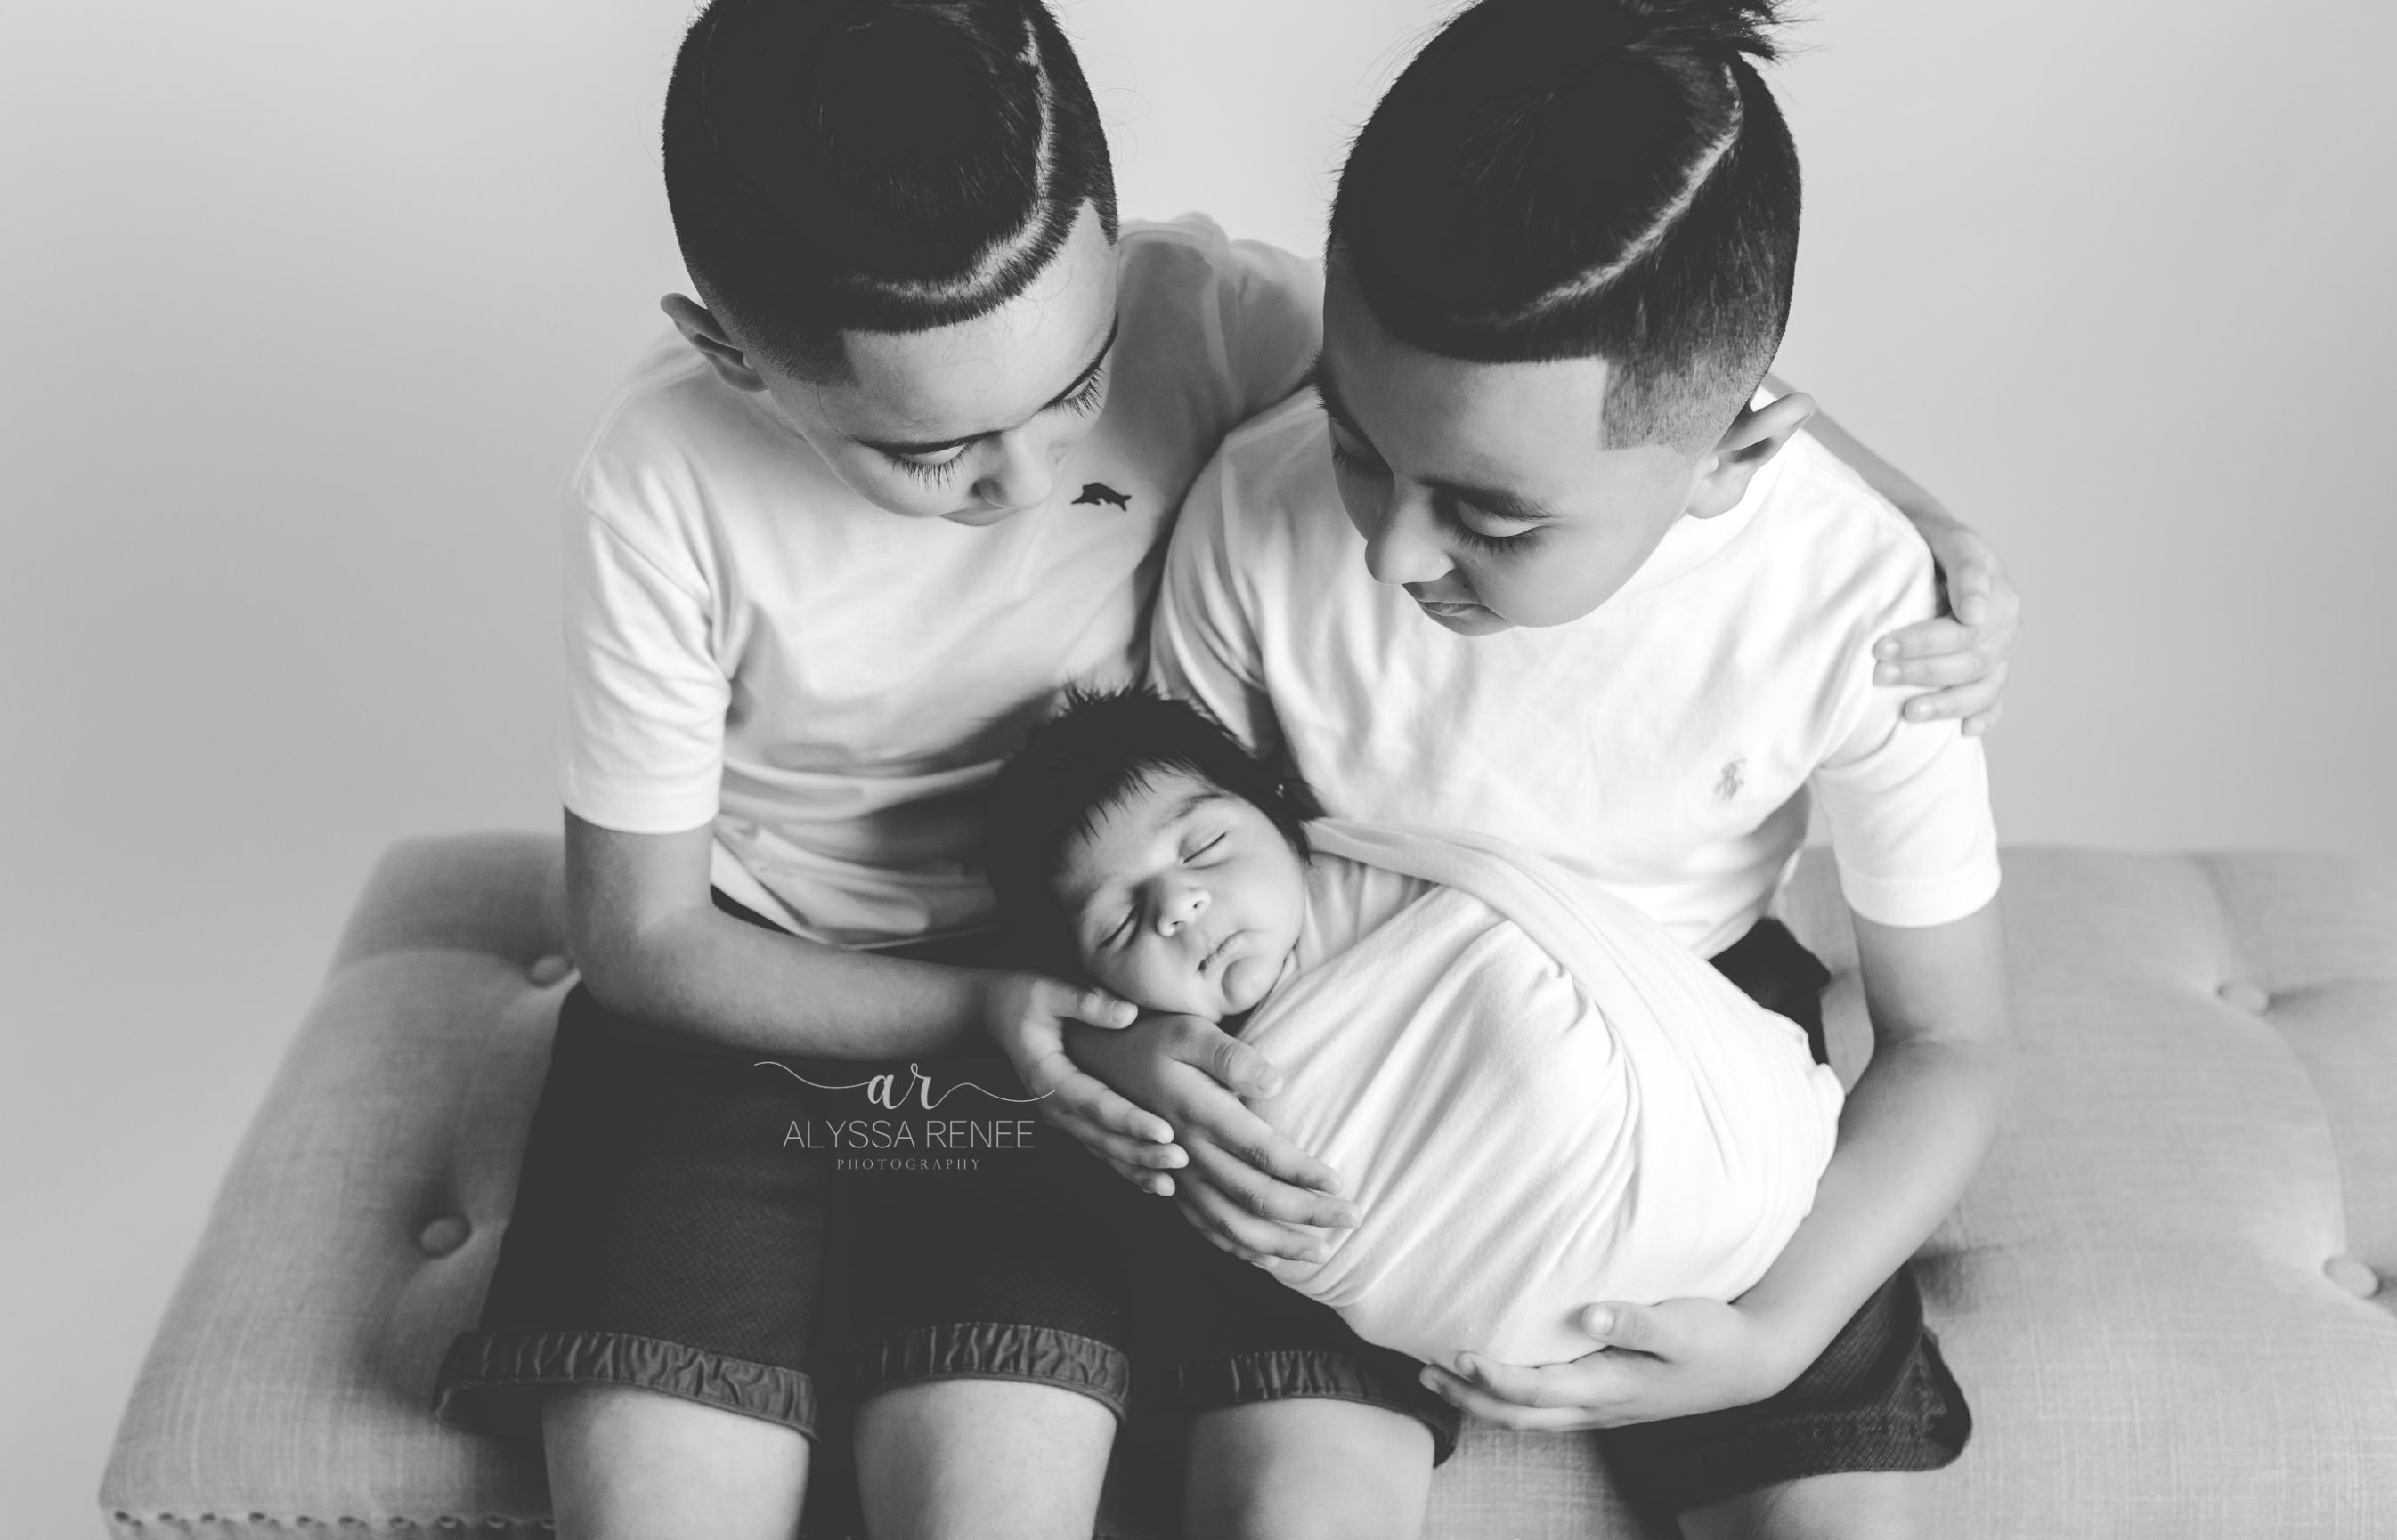  black and white photo of Brothers holding newborn baby sitting on bench in our jacksonville florida studio